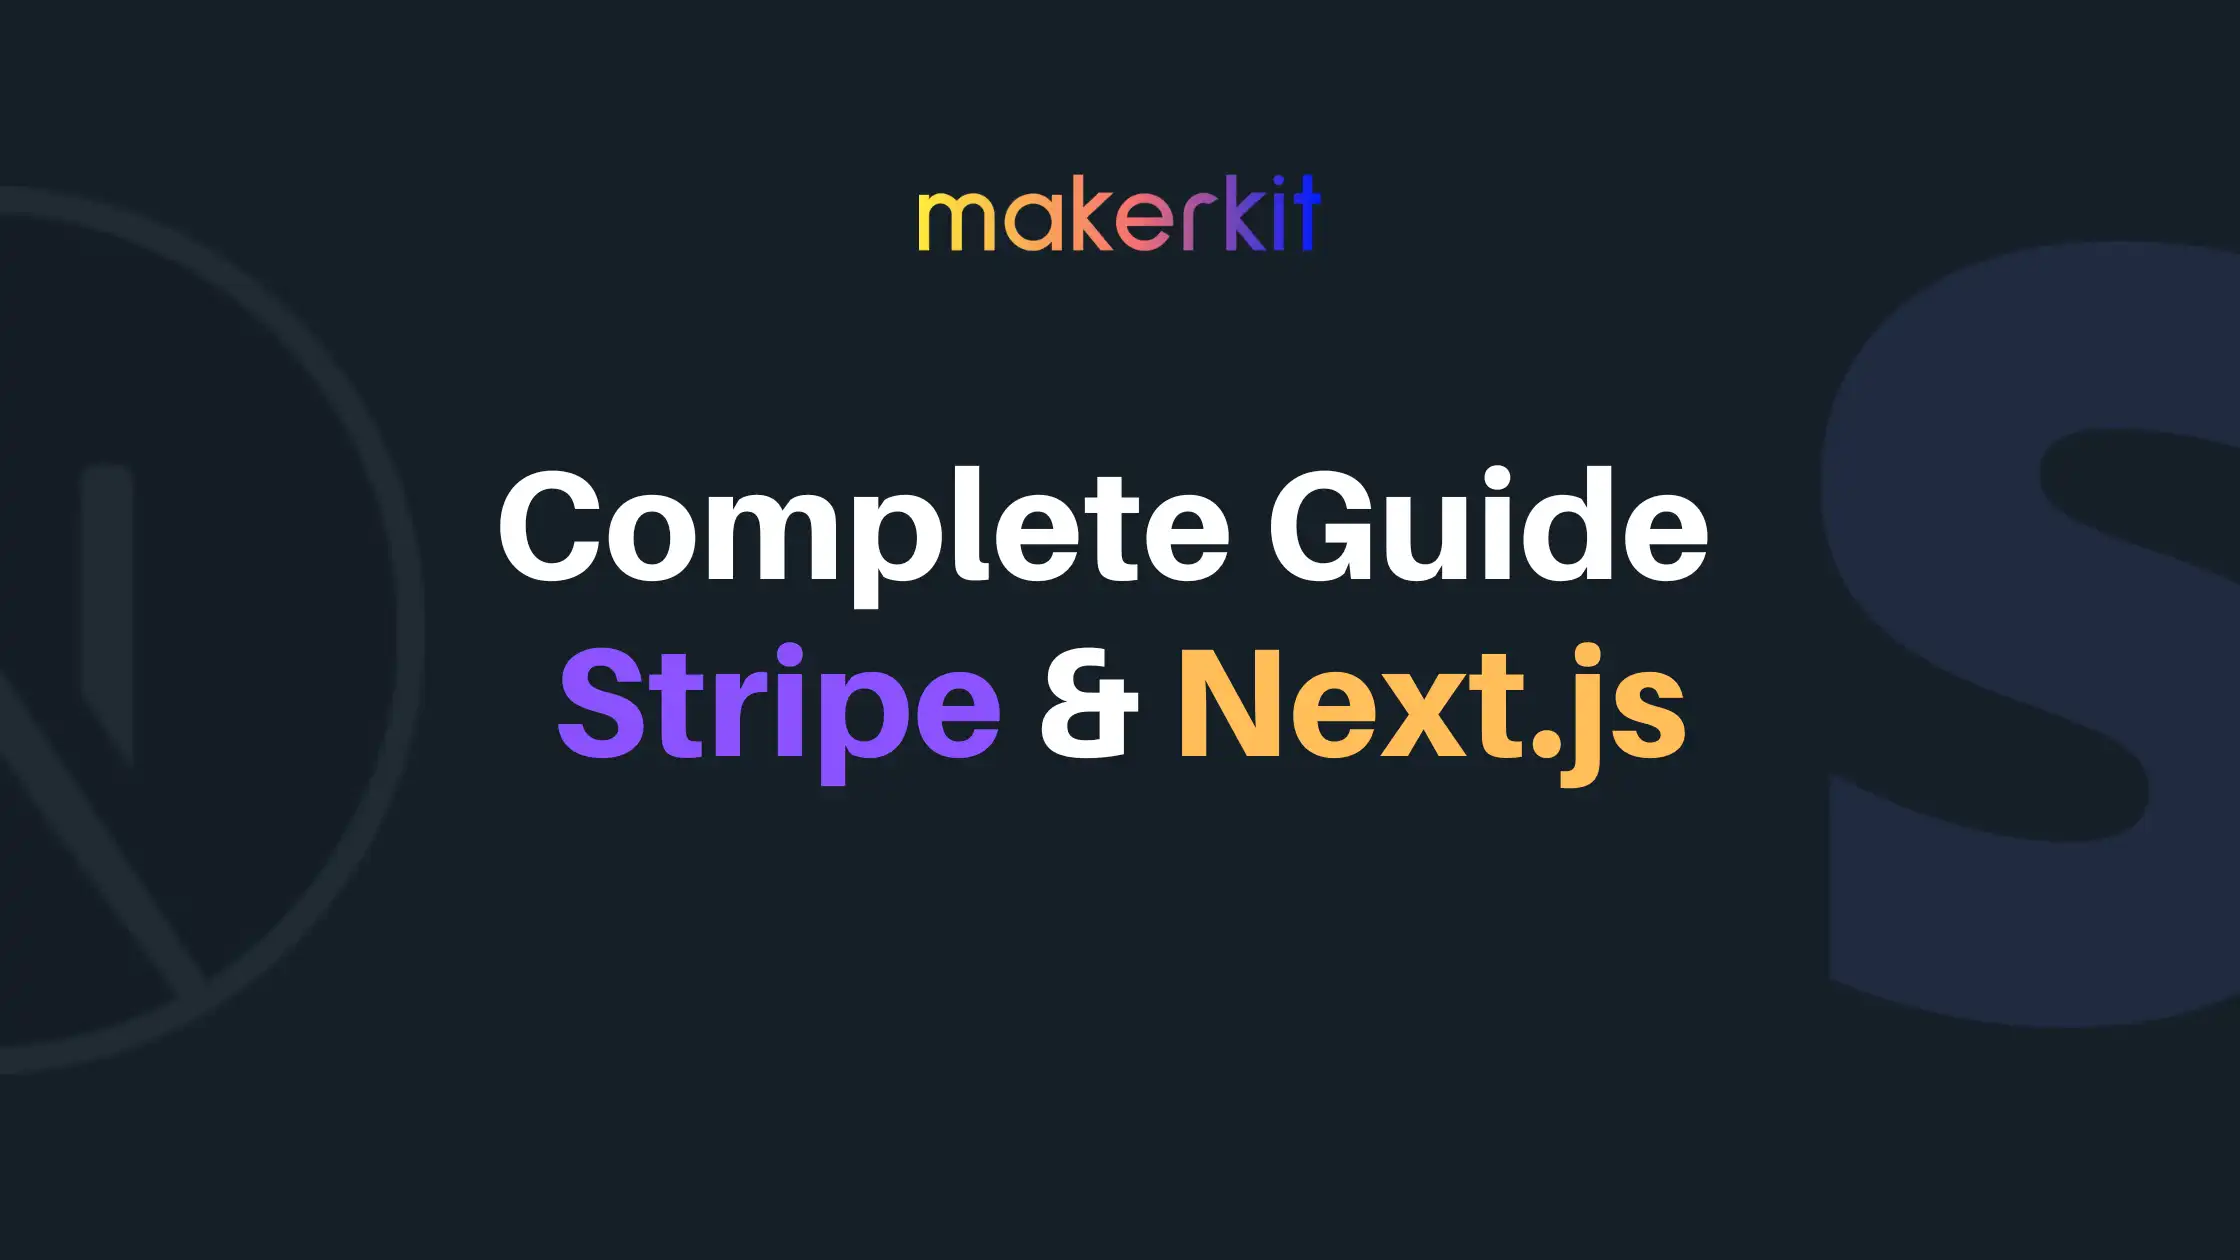 Cover Image for The complete guide to Stripe and Next.js